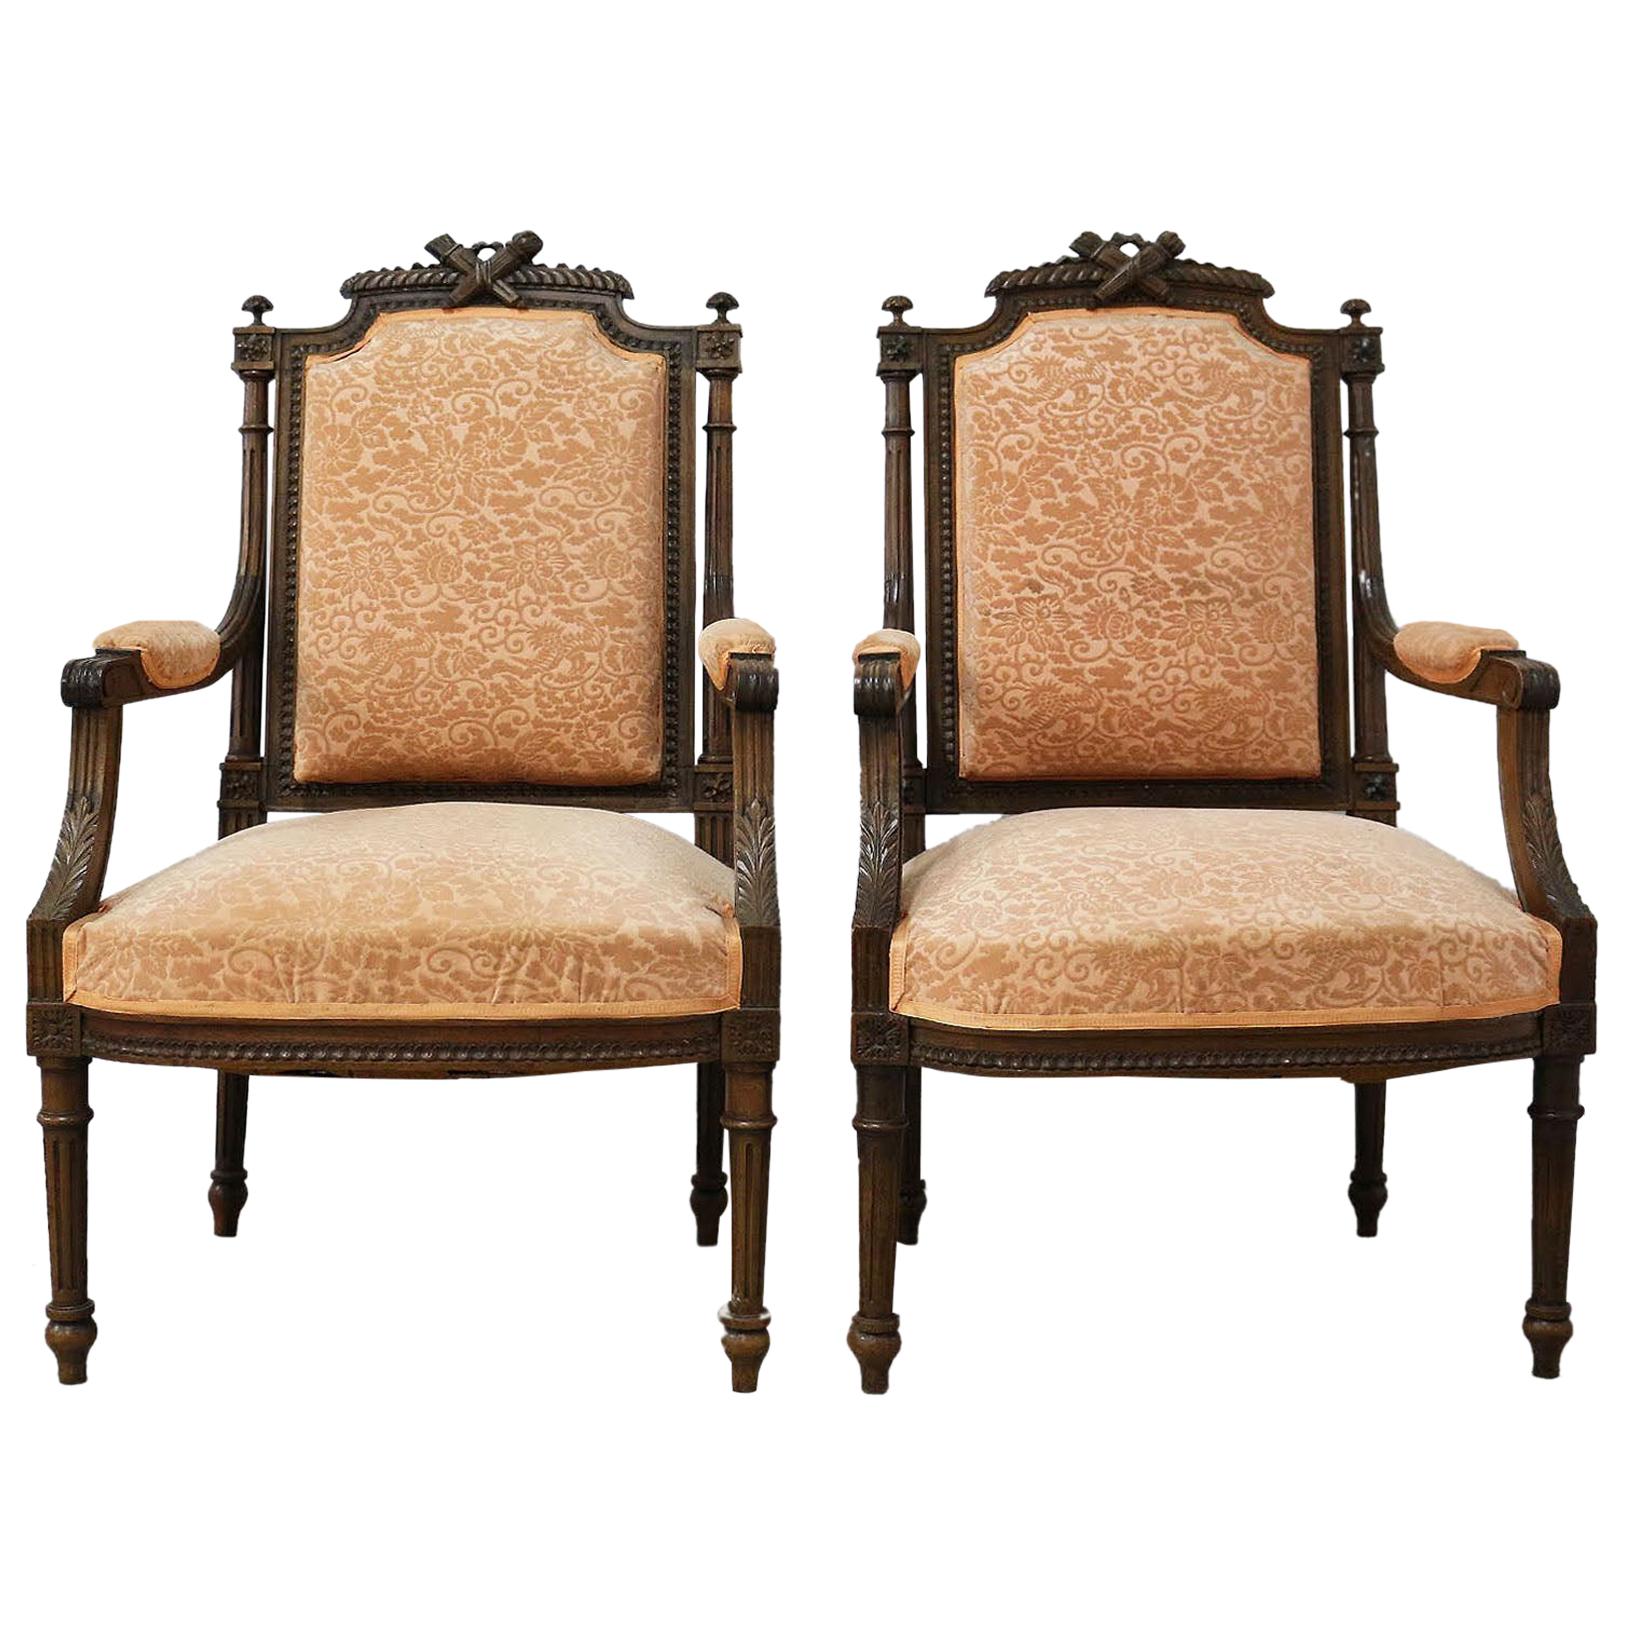 French Open Armchairs 19th Century Louis XVI Fauteuil Includes Recovering, Pair